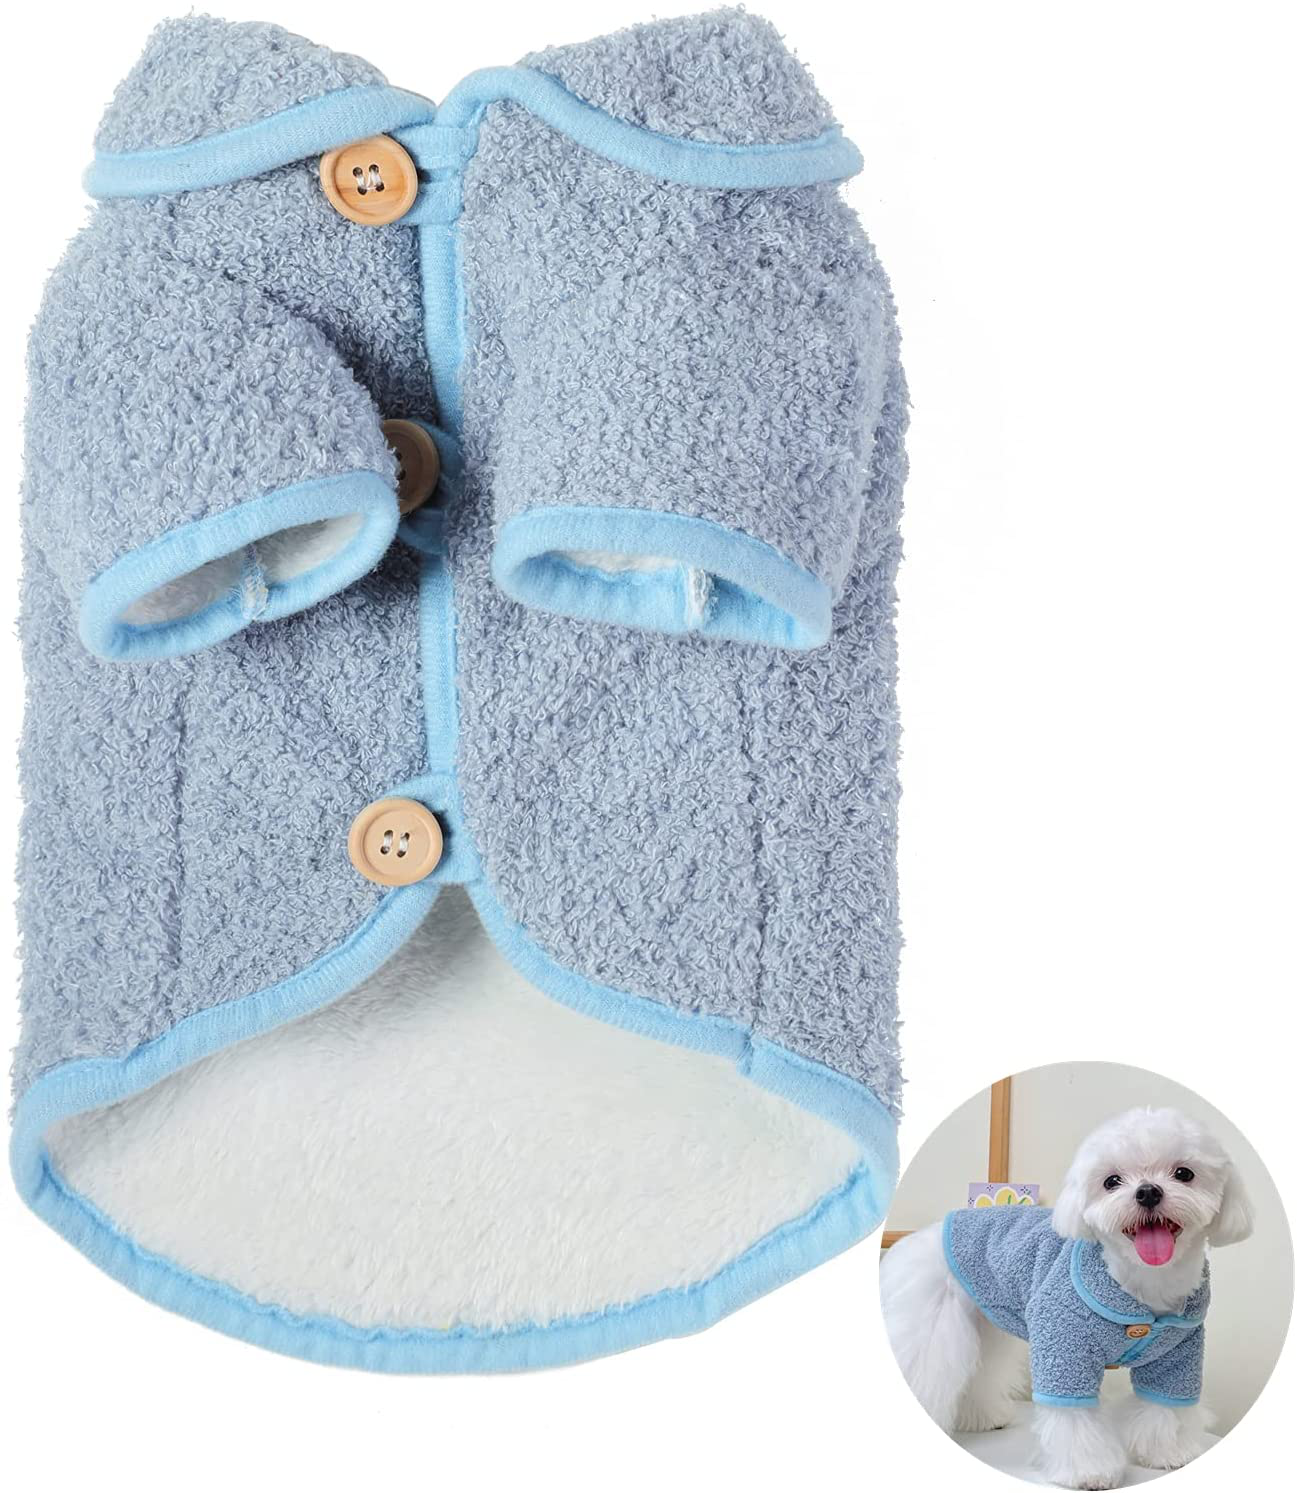 Loyanyy Fleece Lined Dog Vest for Winter Warm Soft Sweater for Small Medium Dog Cat Cute Puppy Kitten Clothes